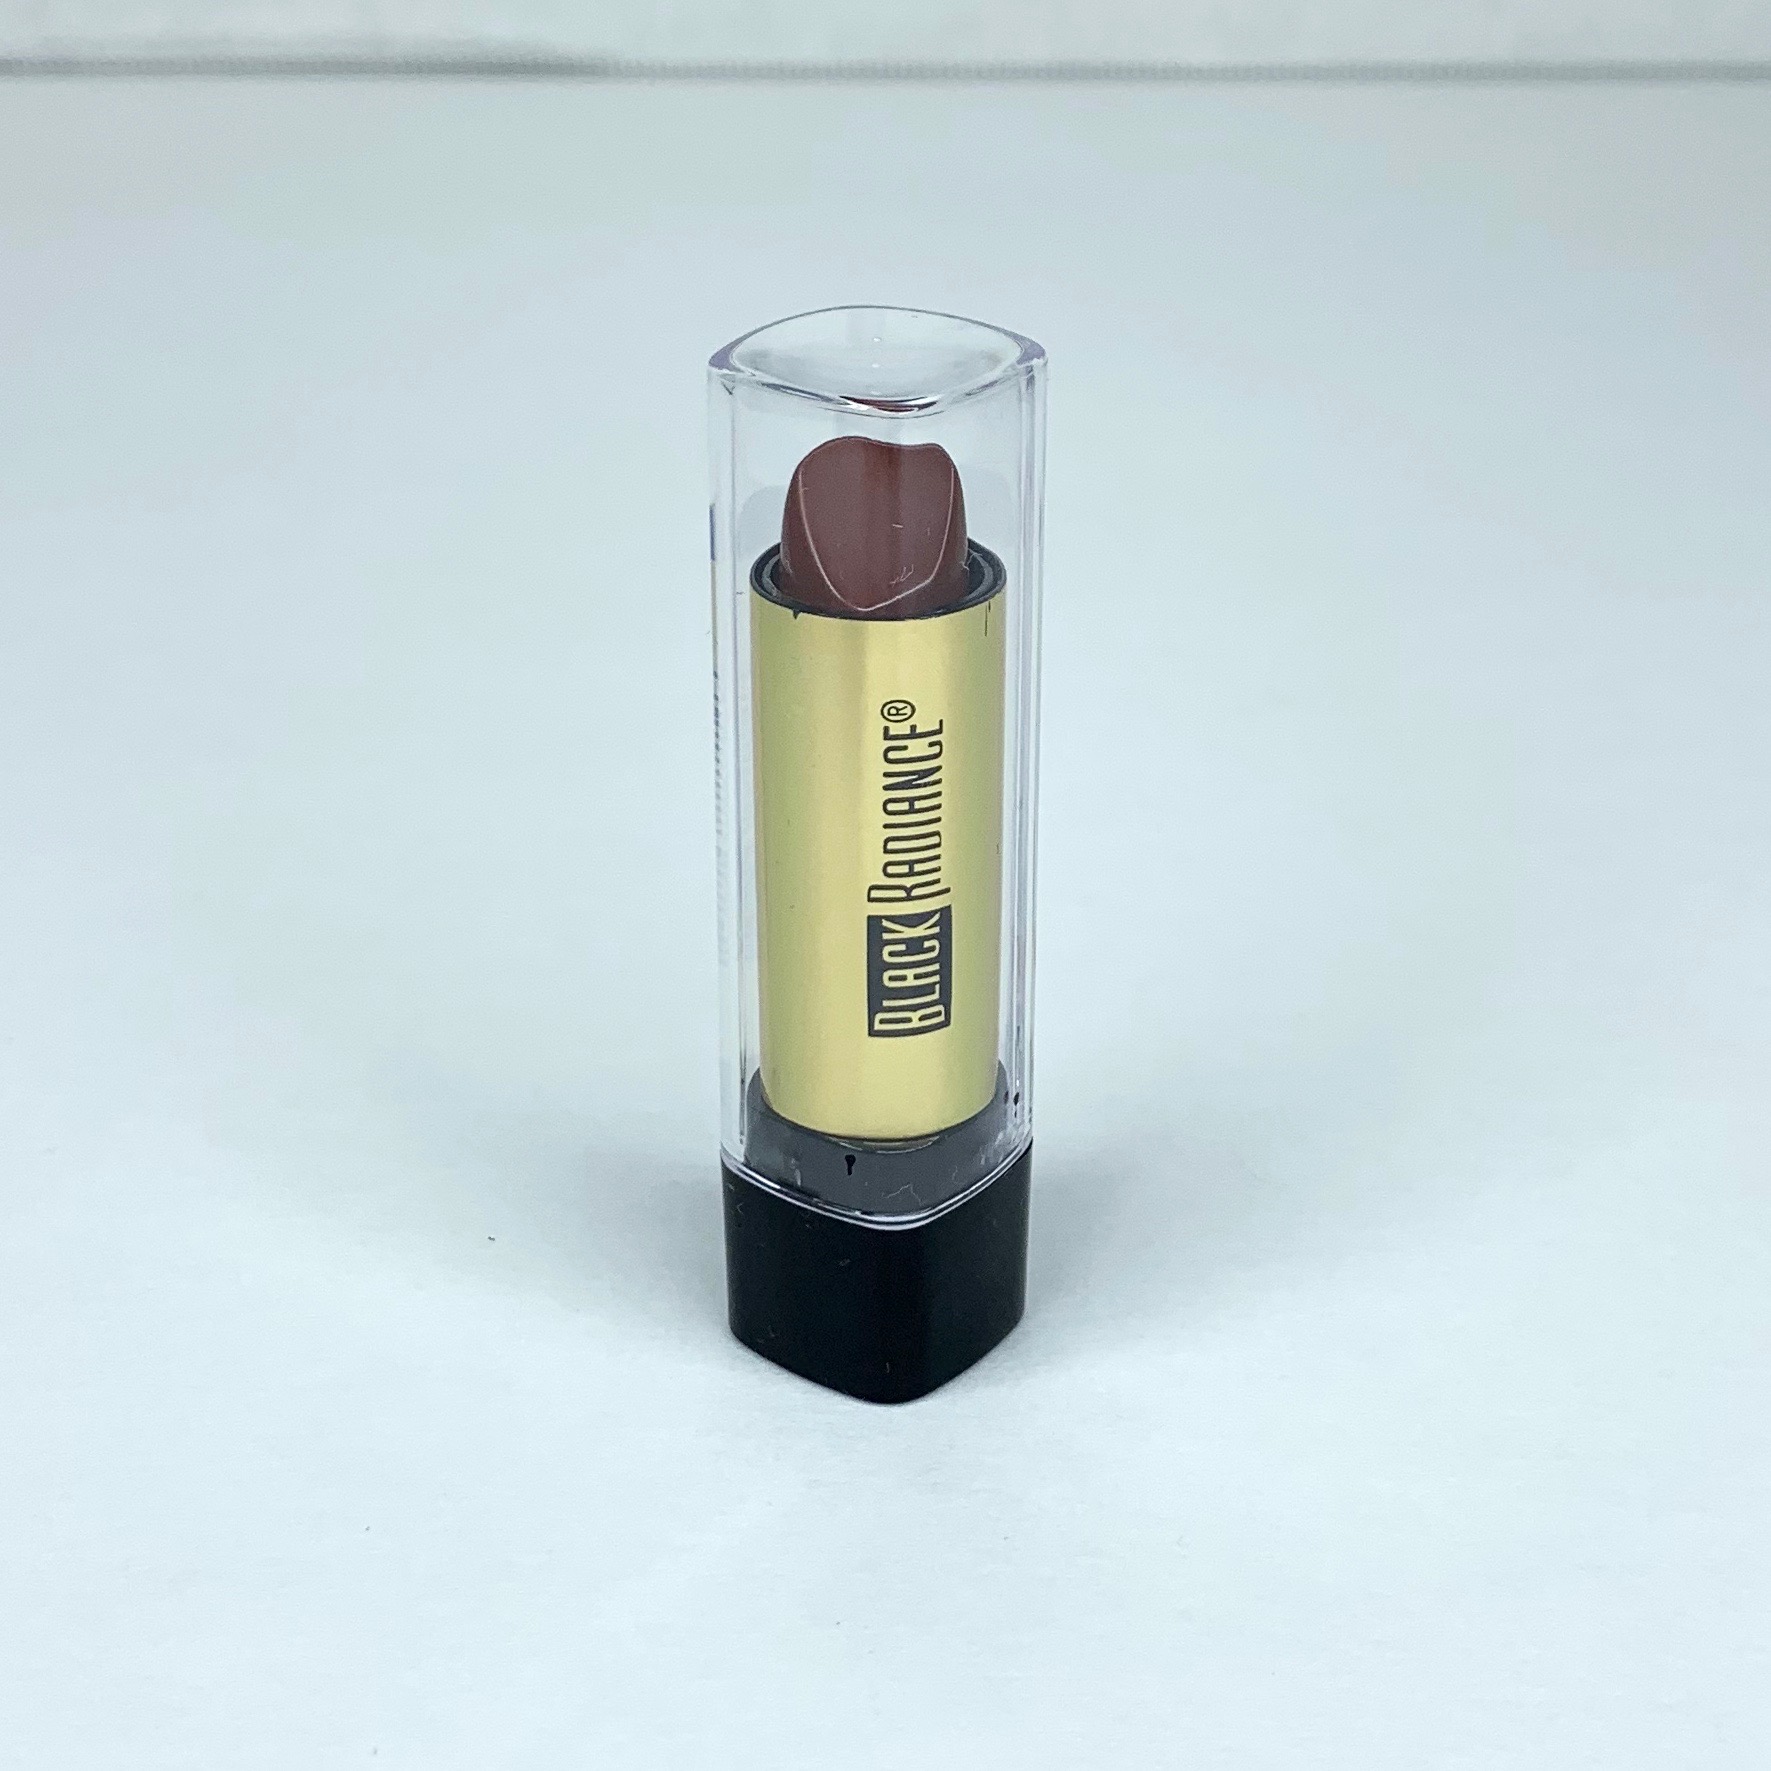 Black Radiance Lipstick Closed for Cocotique March 2020